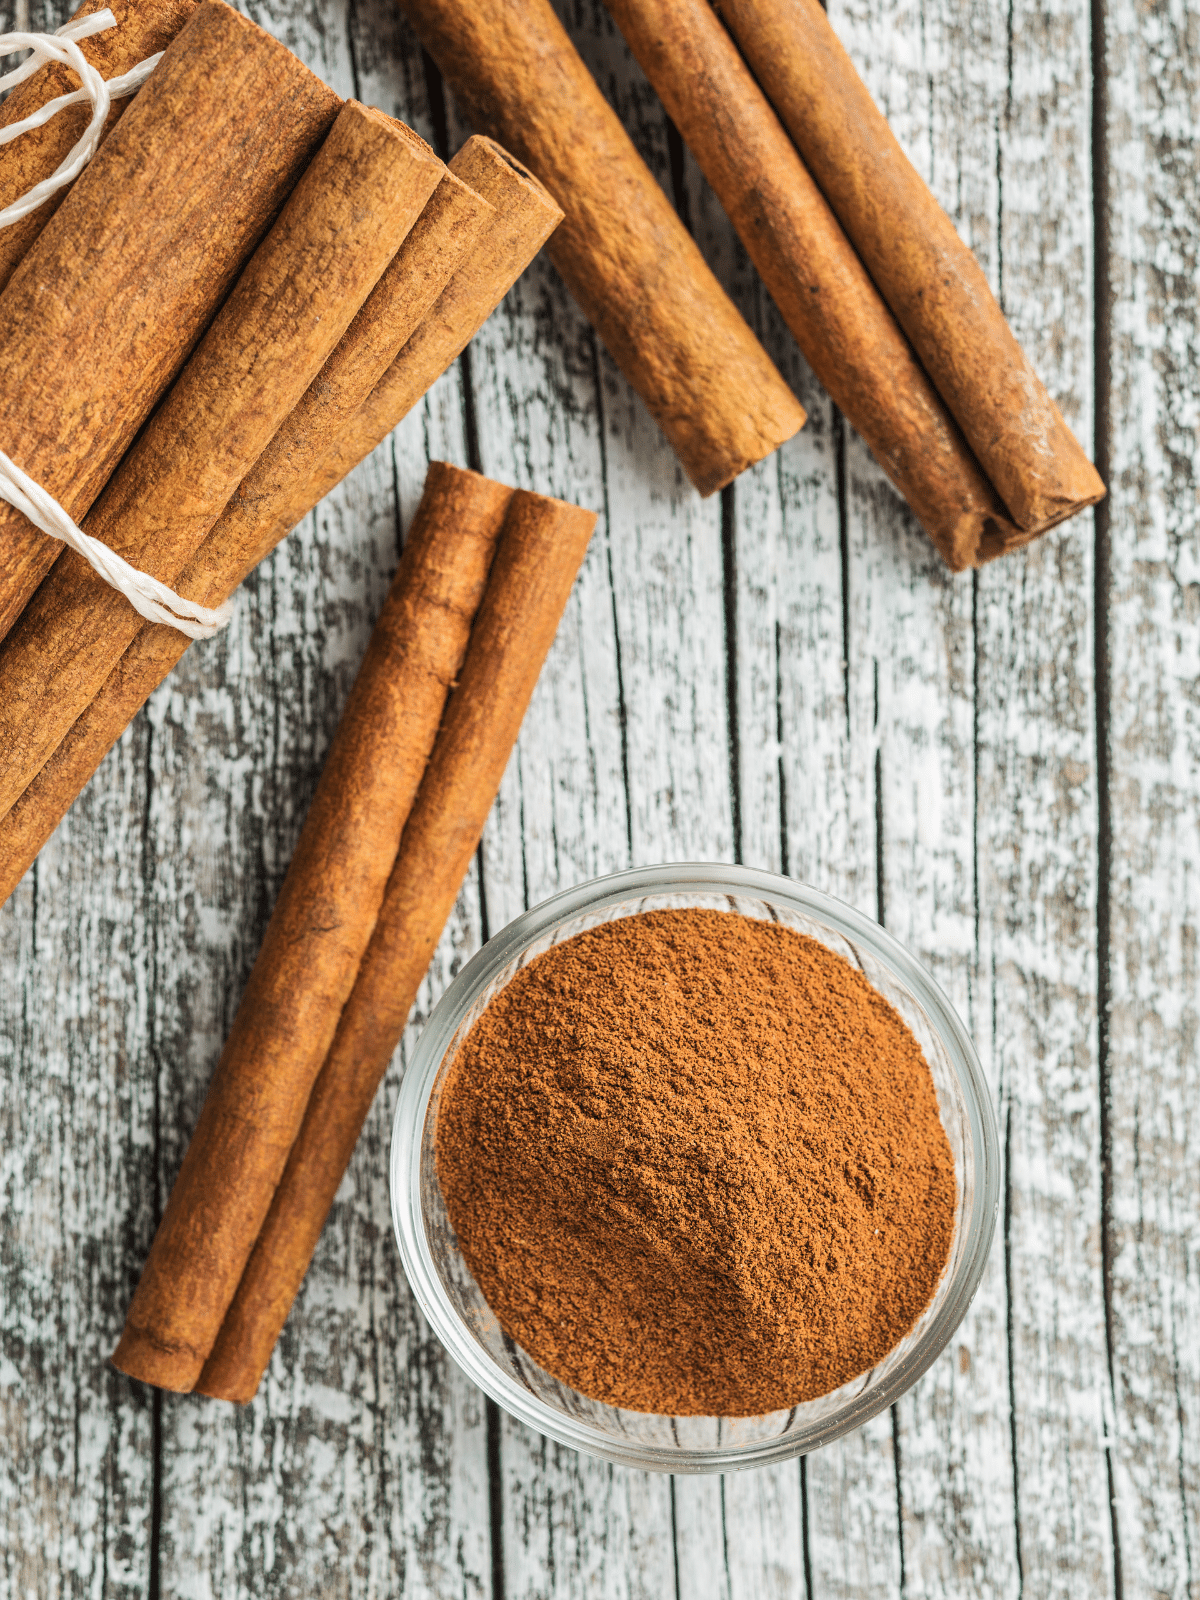 Cinnamon sticks and cinnamon powder in a small glass bowl on a wooden table.